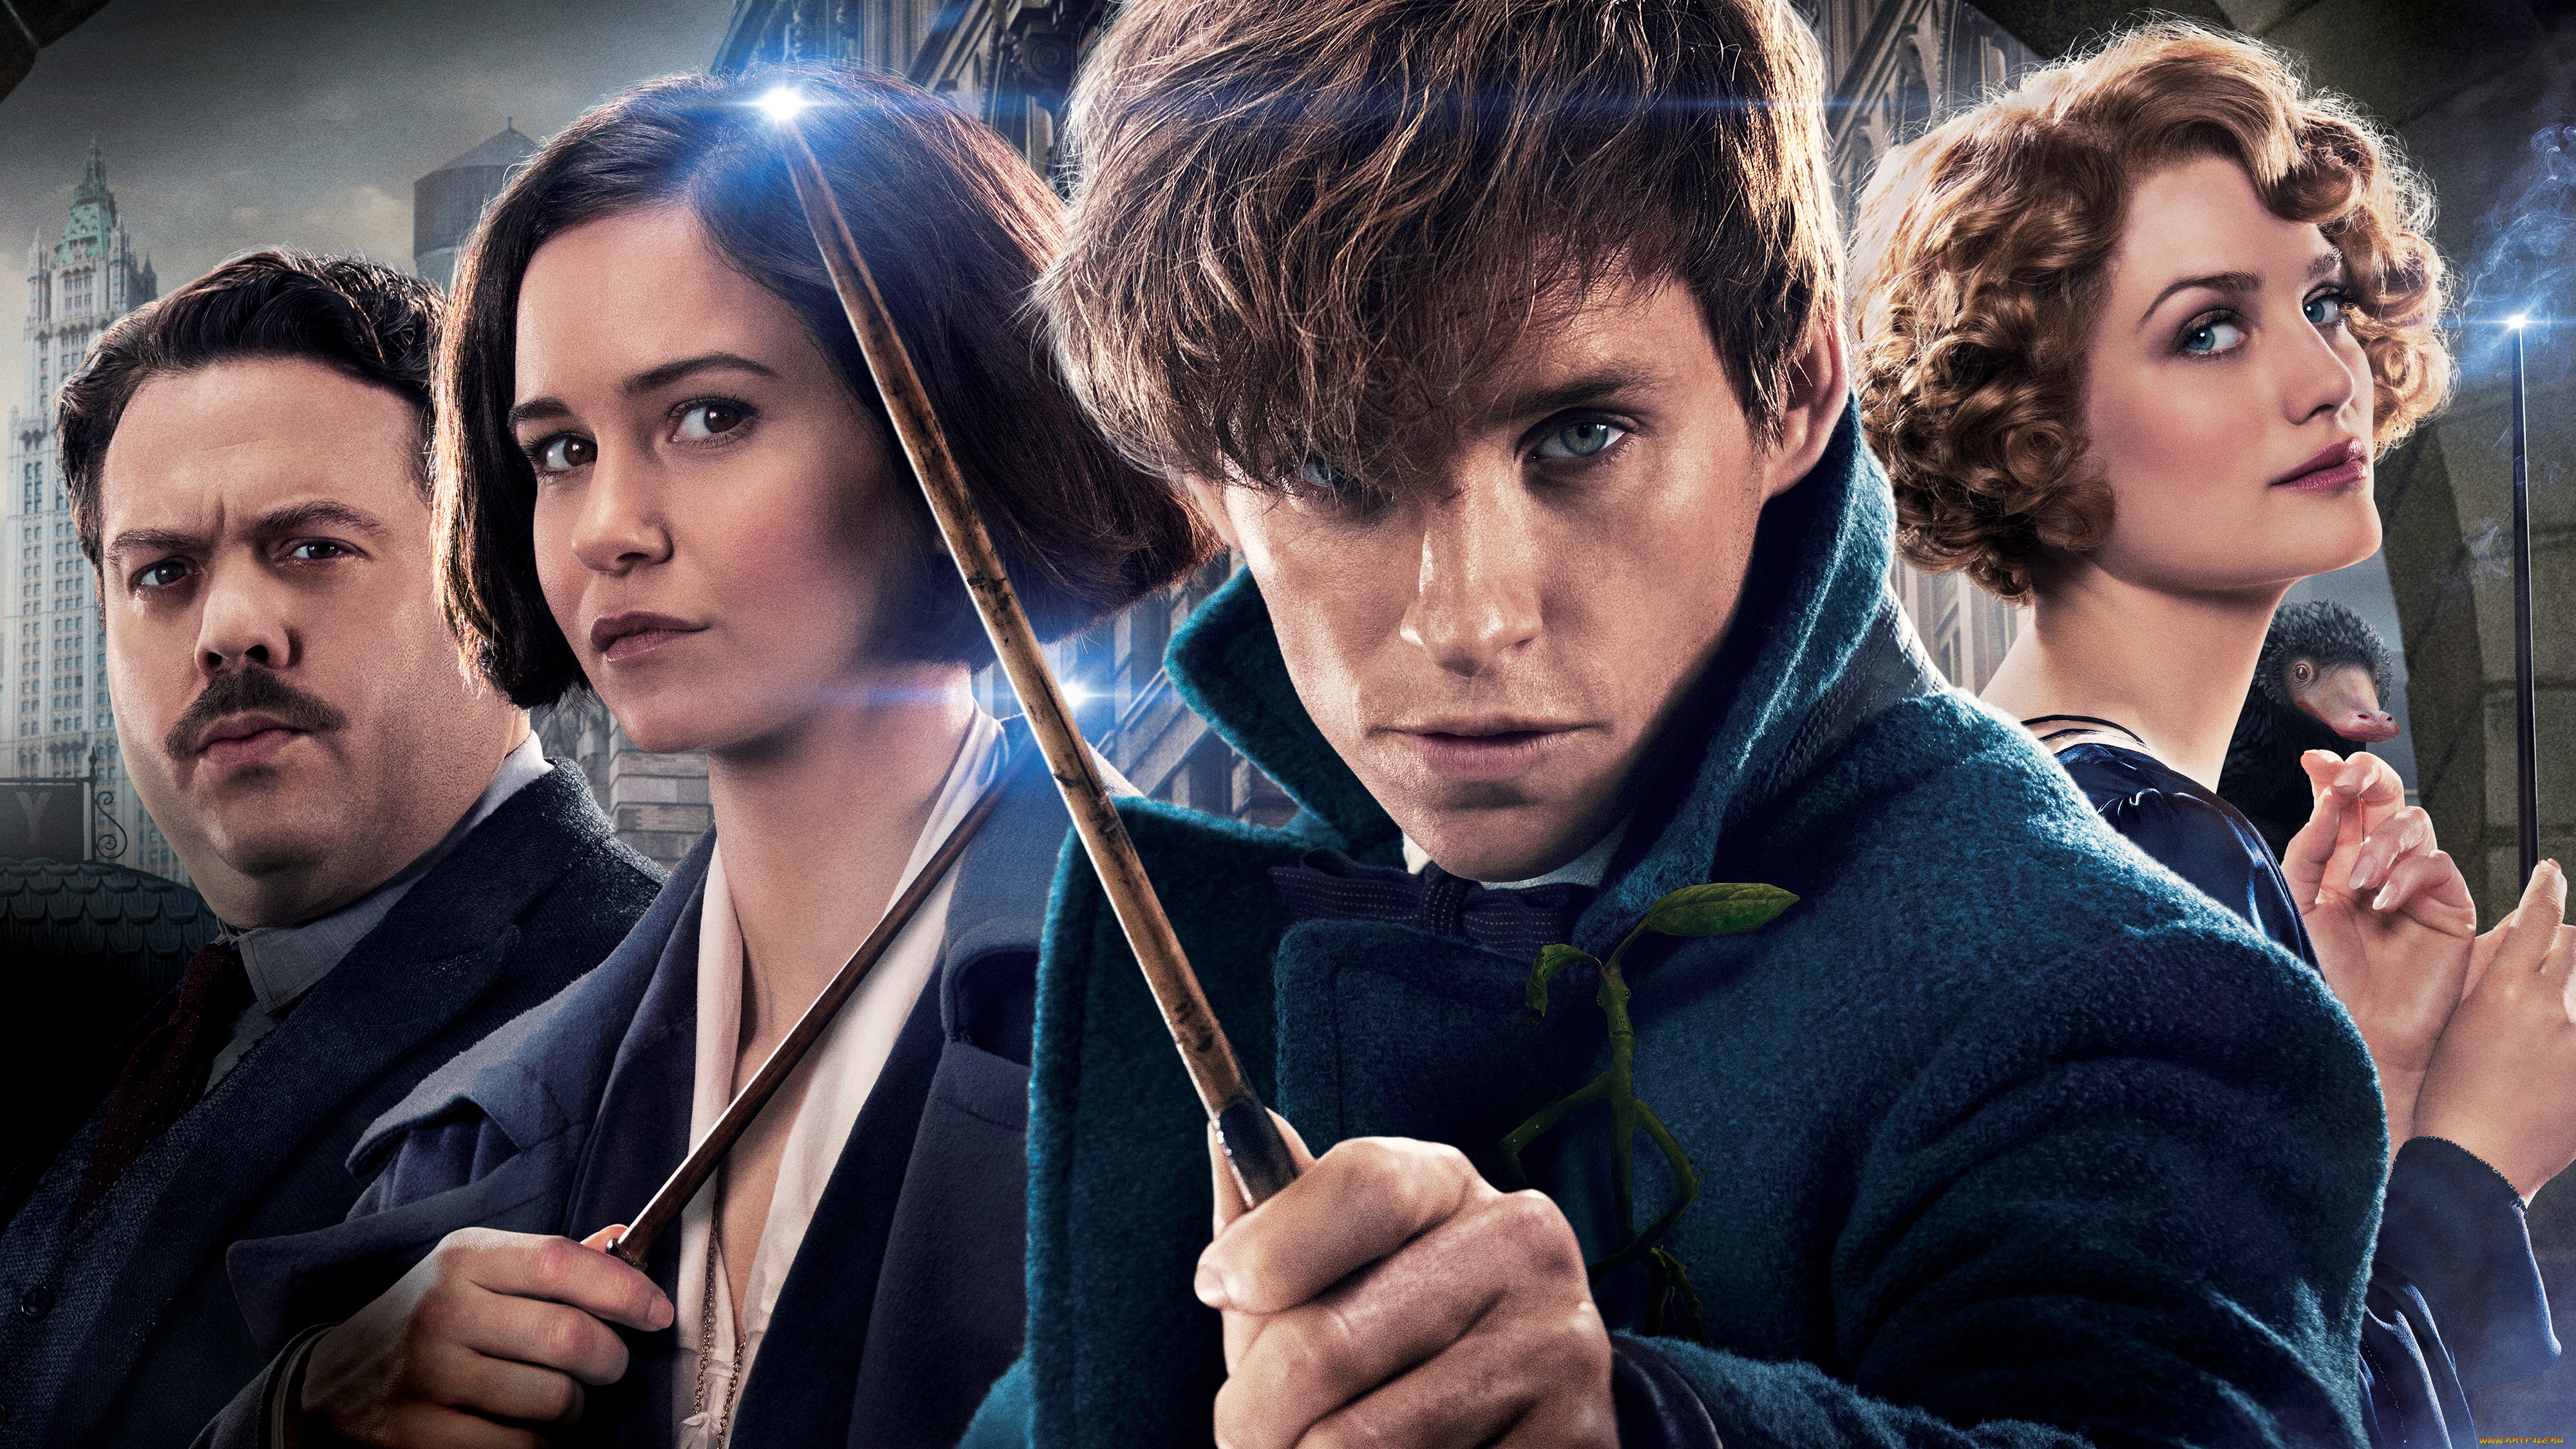  , fantastic beasts and where to find them, fantastic, beasts, and, where, to, find, them